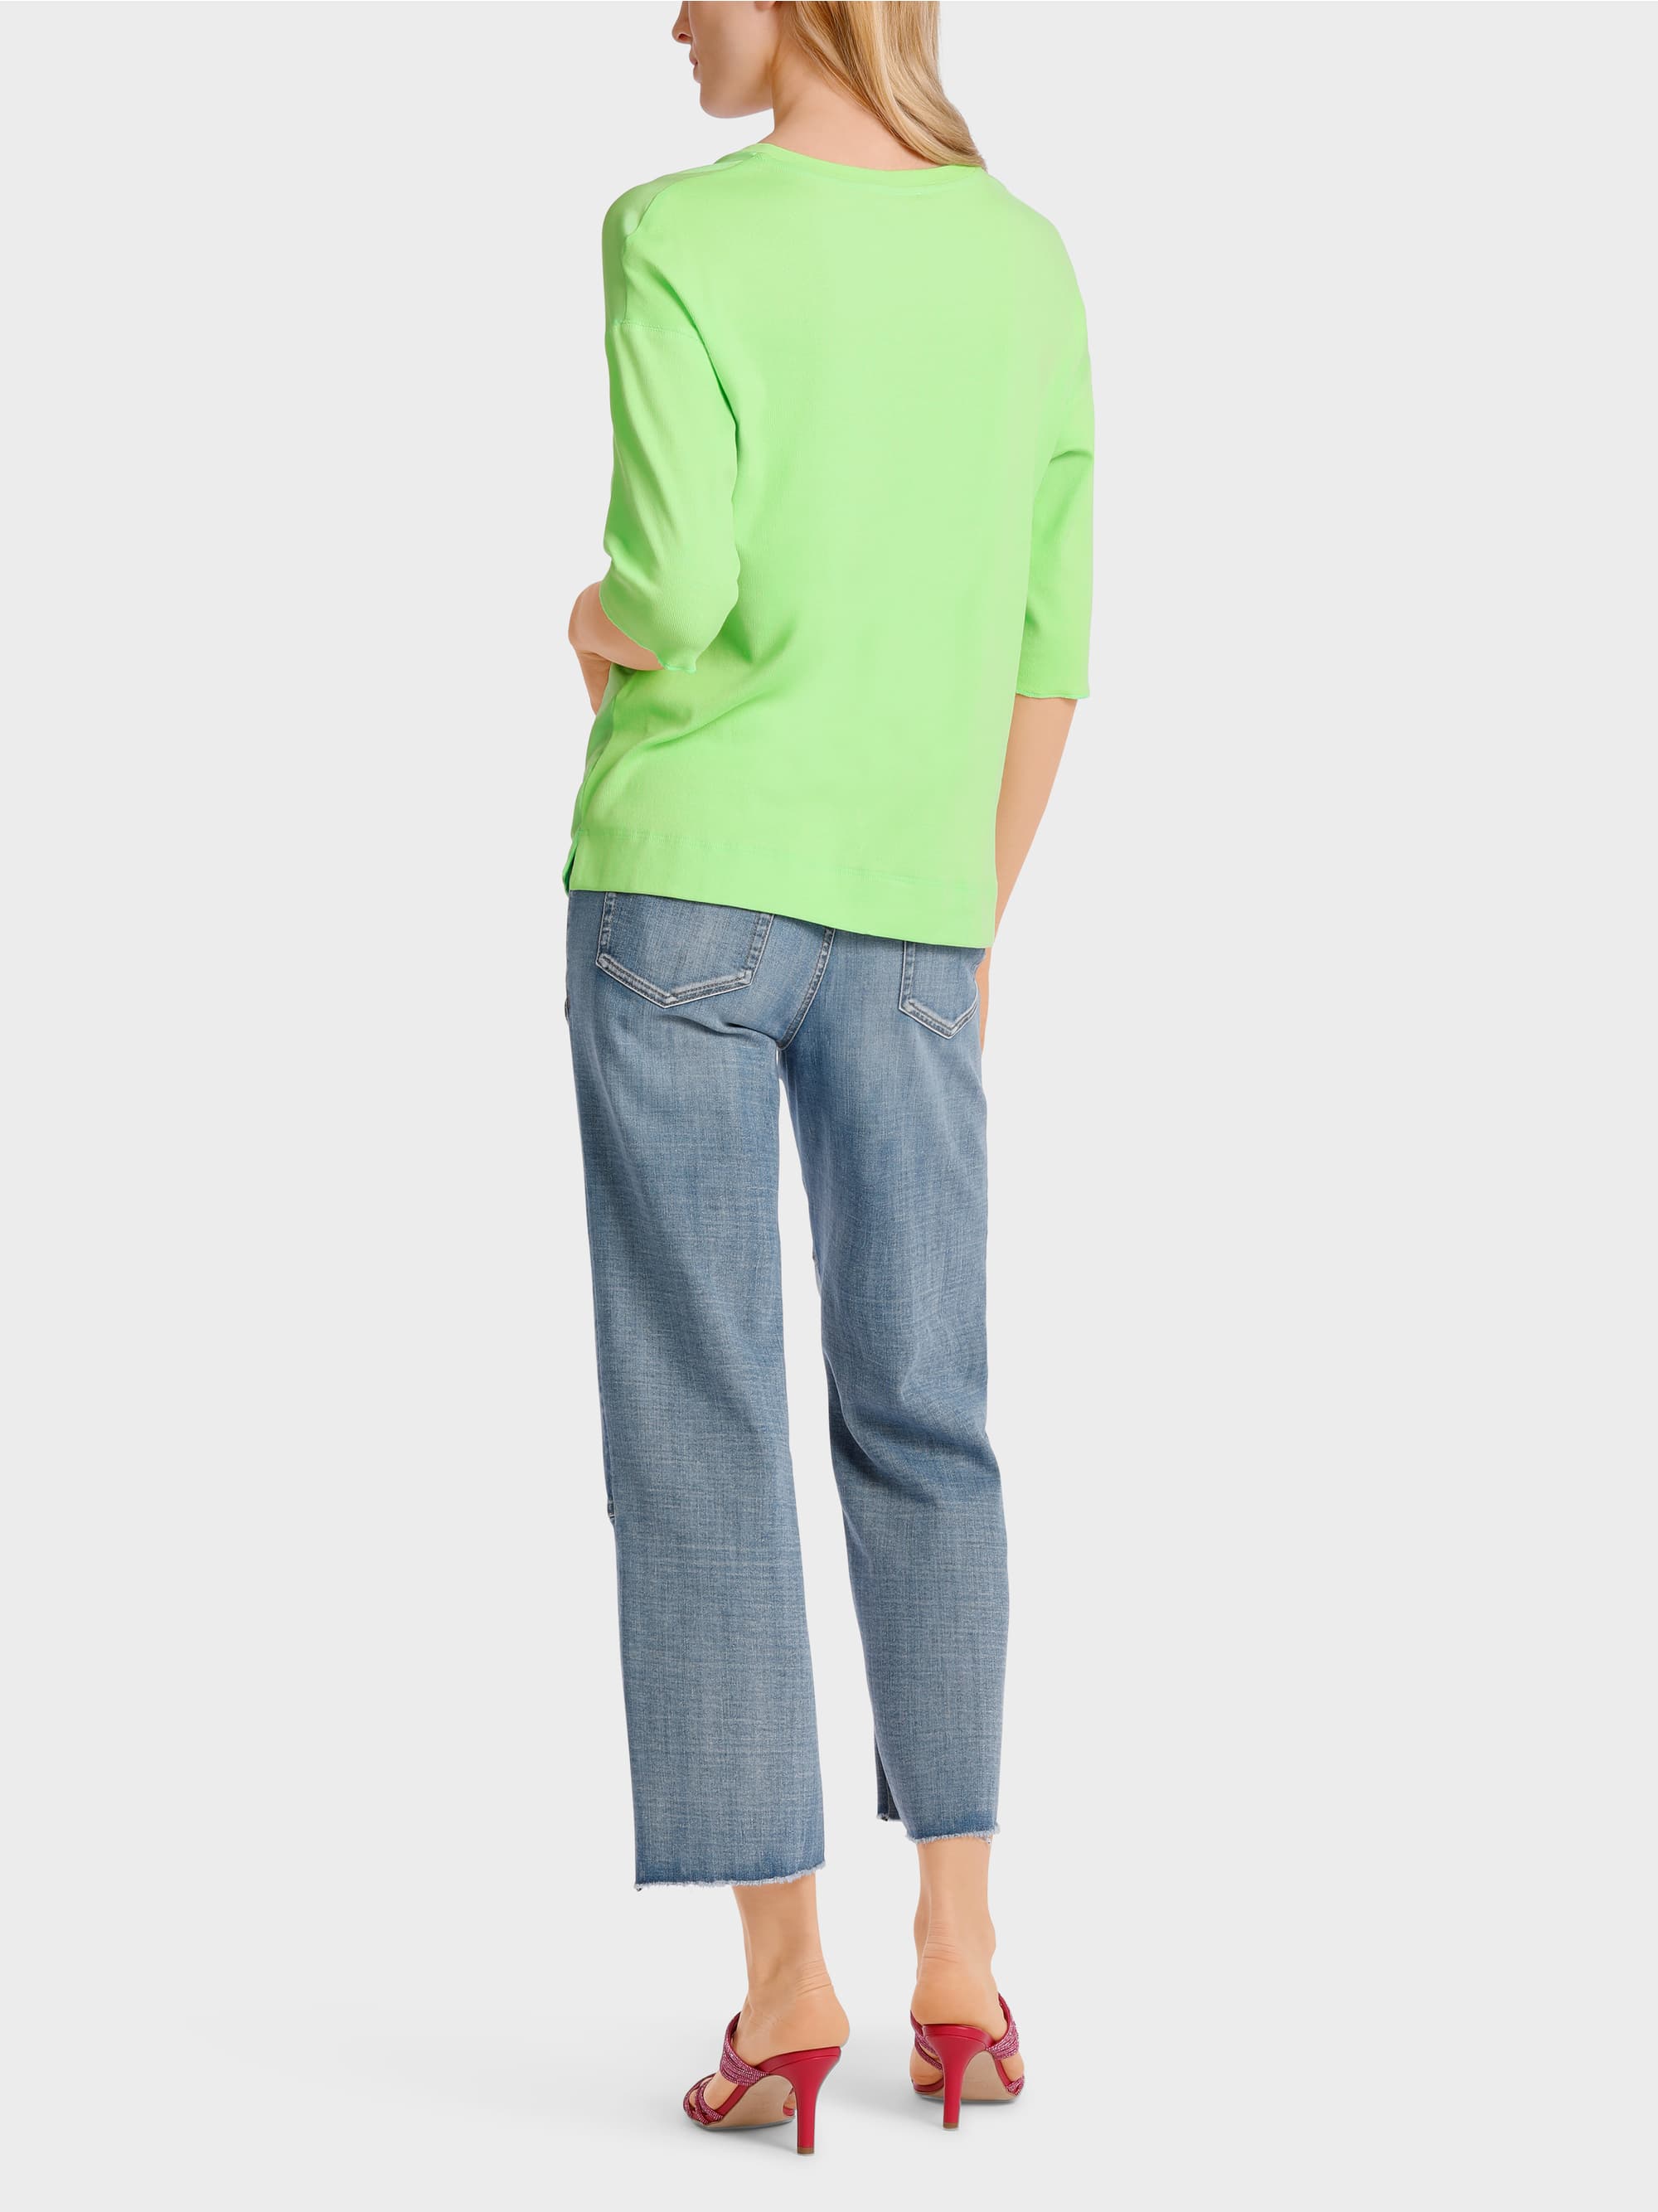 apple green casual blouse